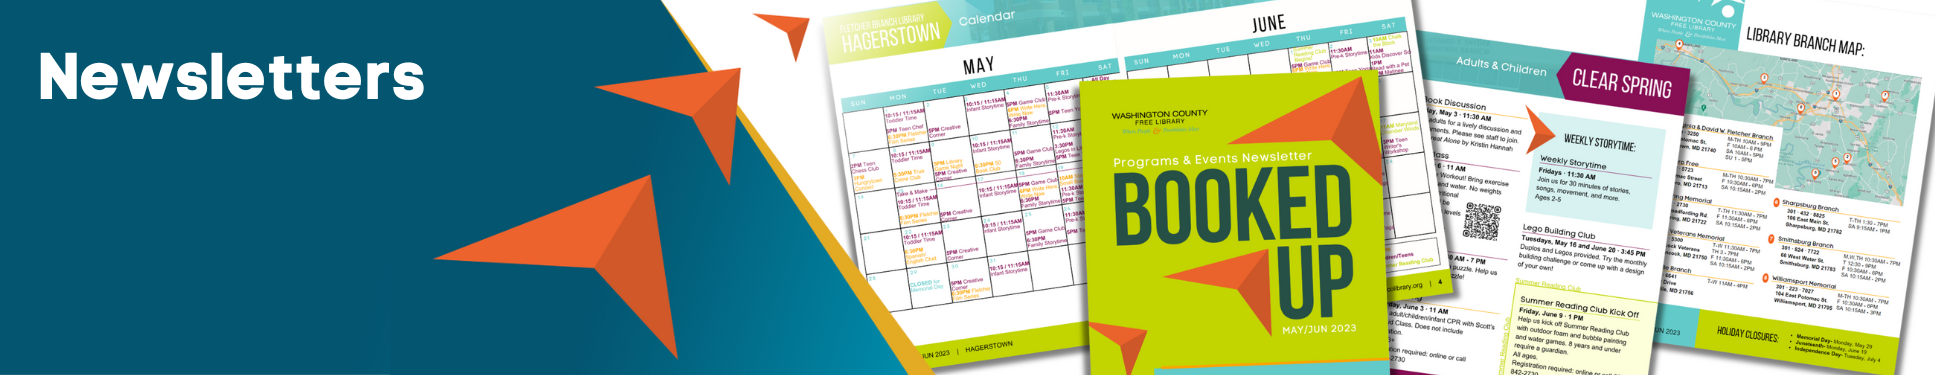 Newsletter banner with three orange arrows pointing to calendar and event pages from "Booked Up" booklet.